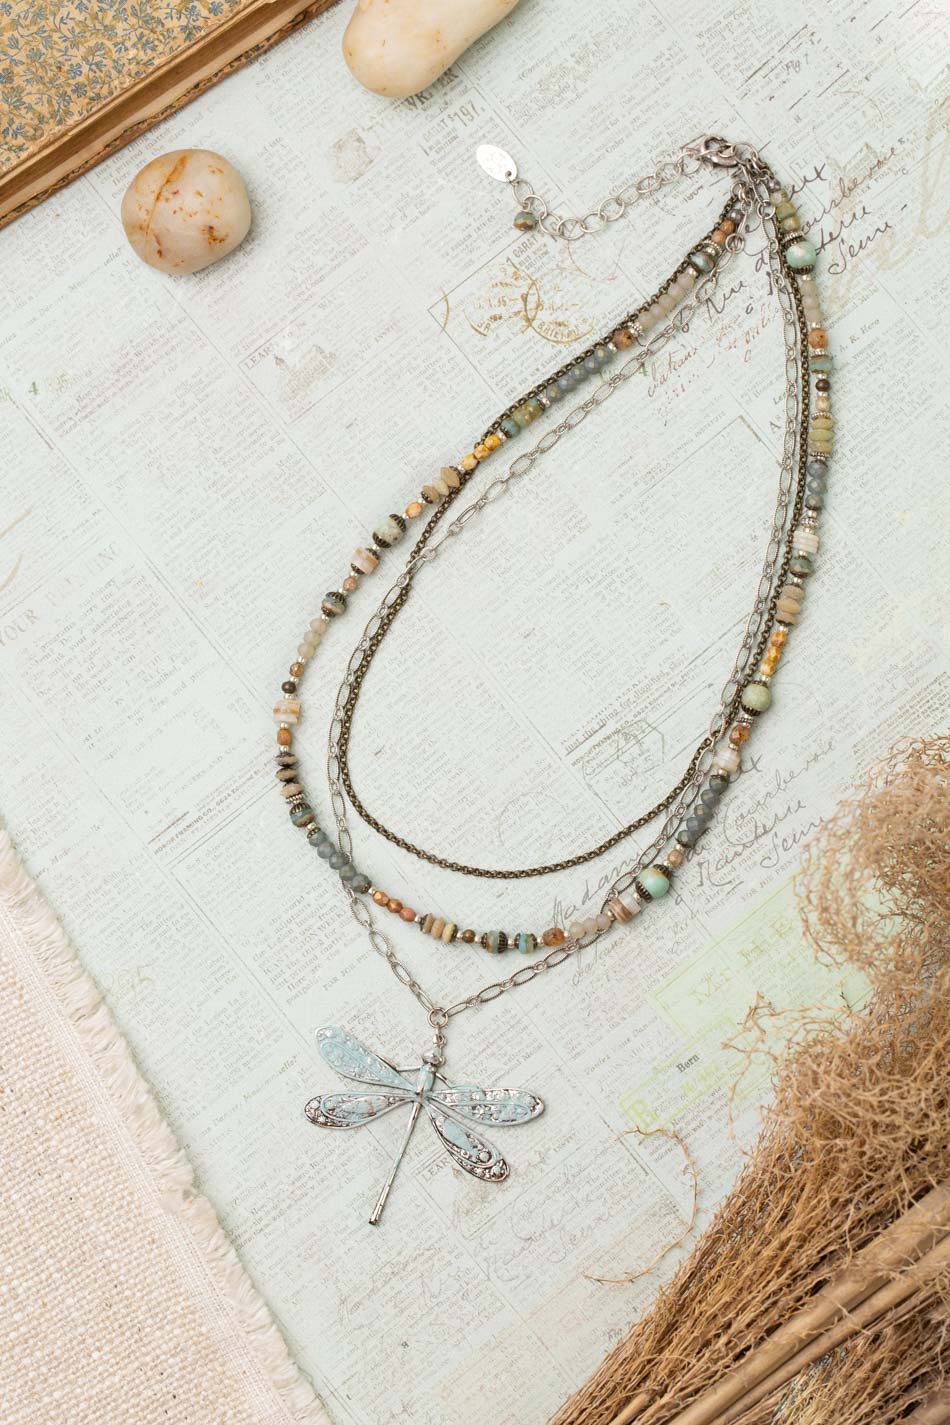 Wisdom Within 16.5-18.5" Czech Glass, Caribbean Calcite Shell With Patina Dragonfly Pendant Multistrand Necklace